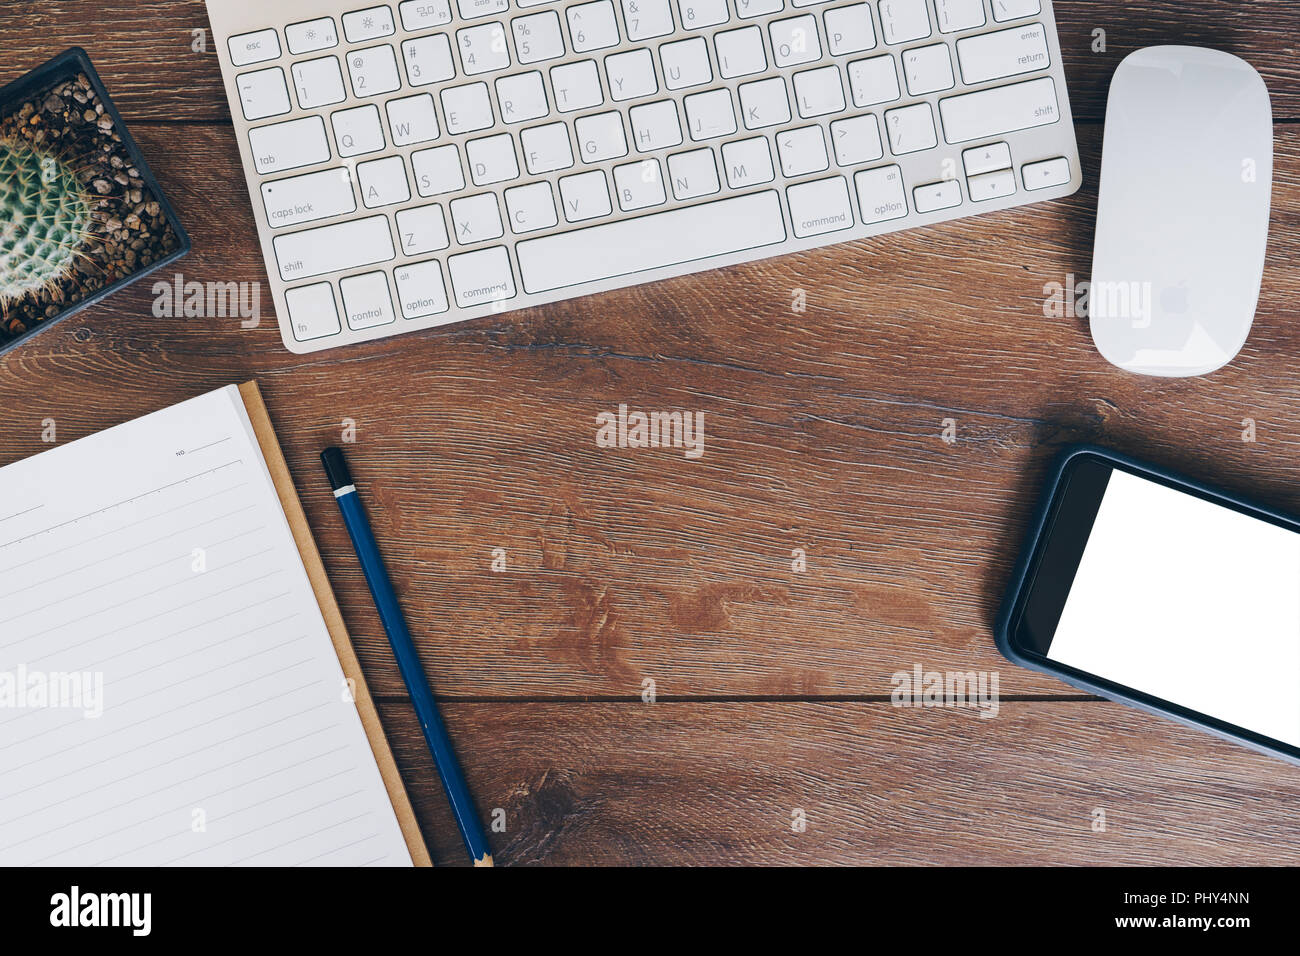 High angle view of a setting table computer, phone, tablet of business workplace. Stock Photo